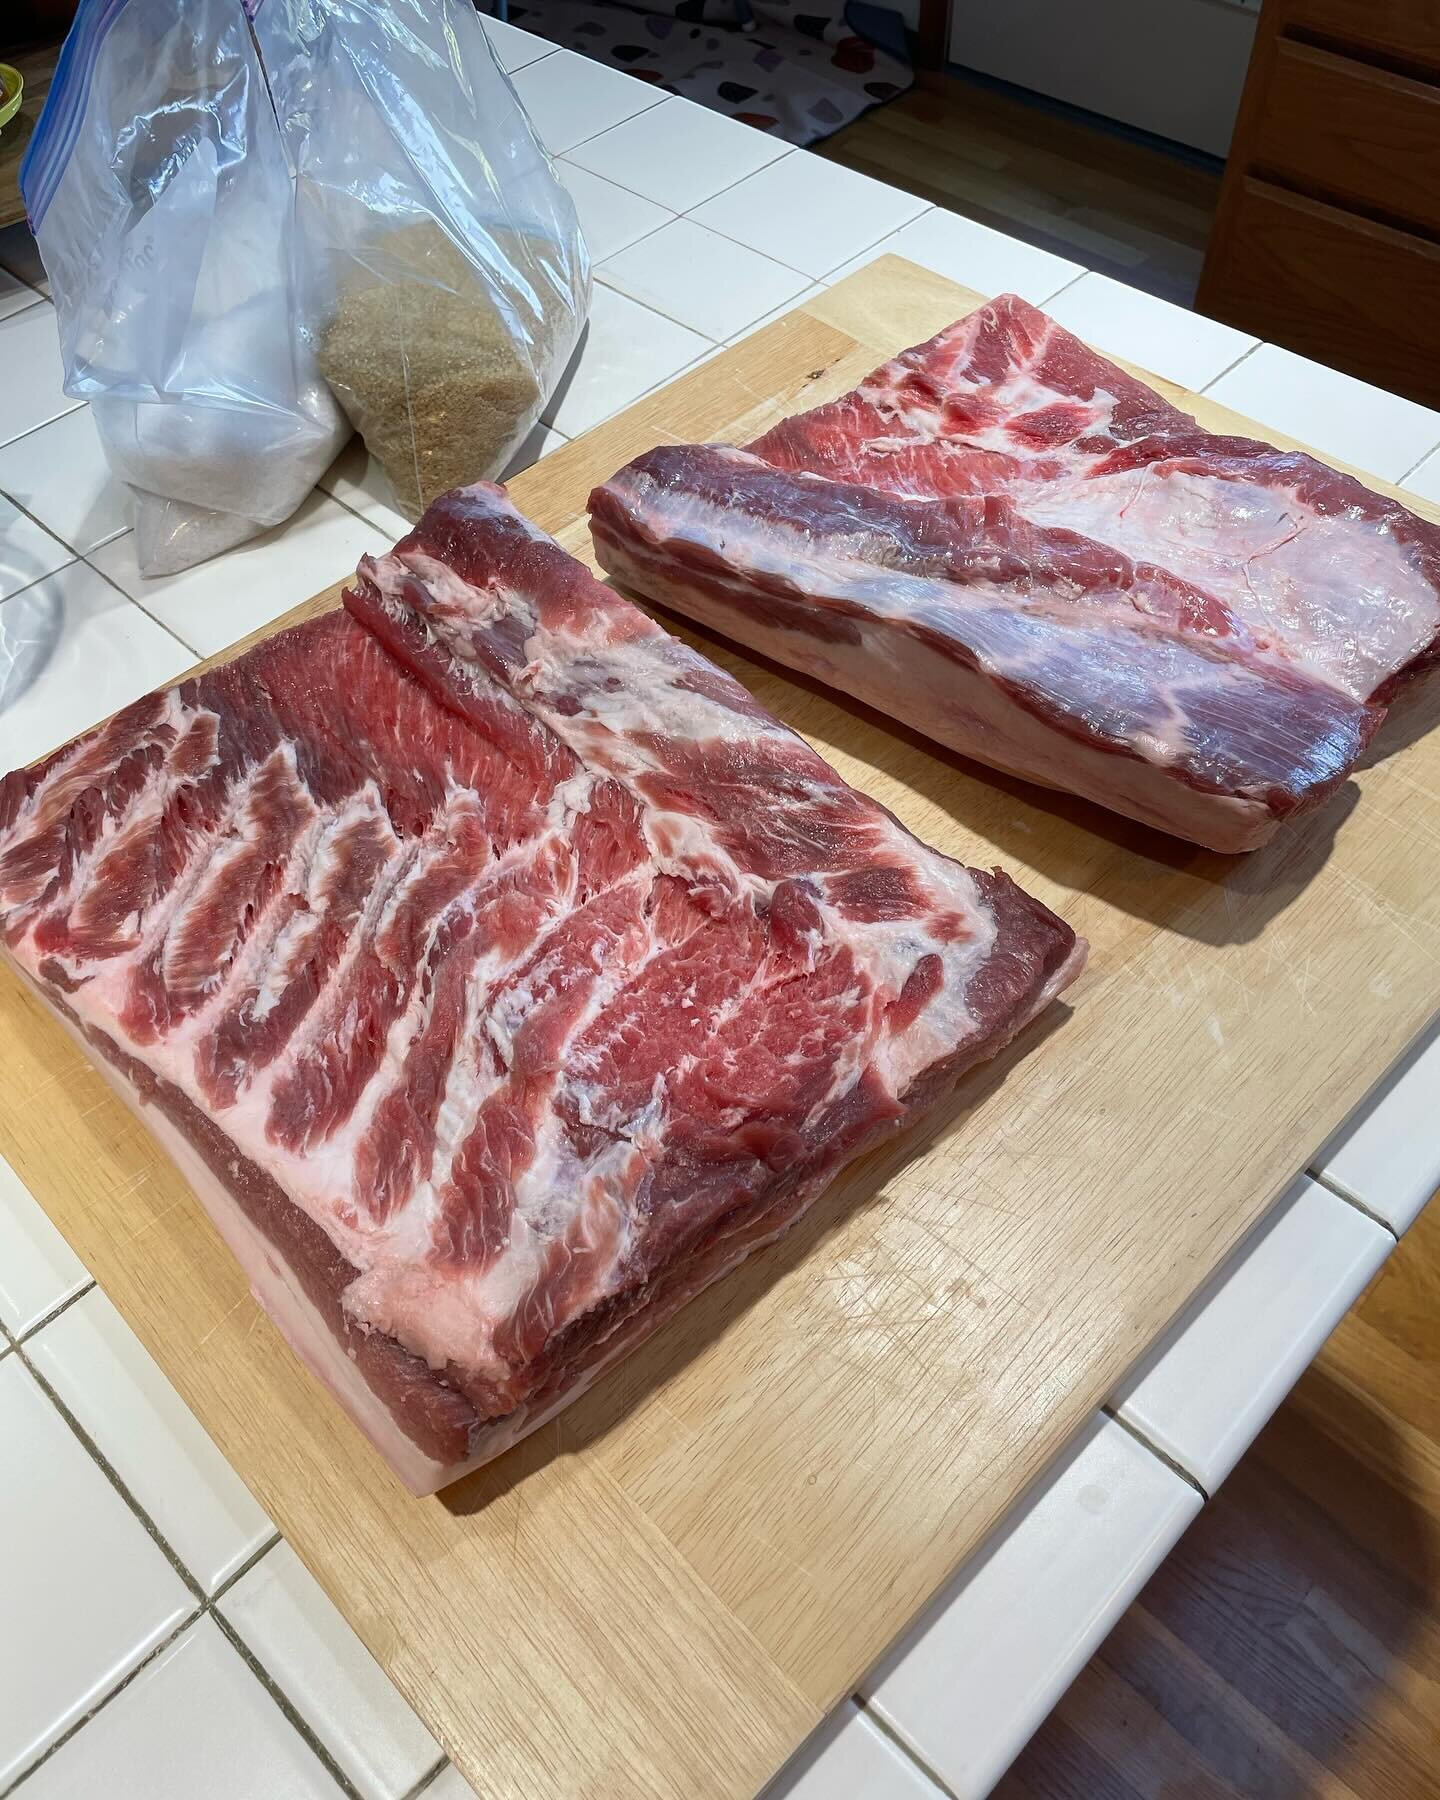 First attempt at bacon turned out pretty good. Just a little too salty. Probably should have stopped adding the sugar/salt cure three days earlier. Took close to two weeks in the fridge. I have since had it cold-smoked and it&rsquo;s even better.